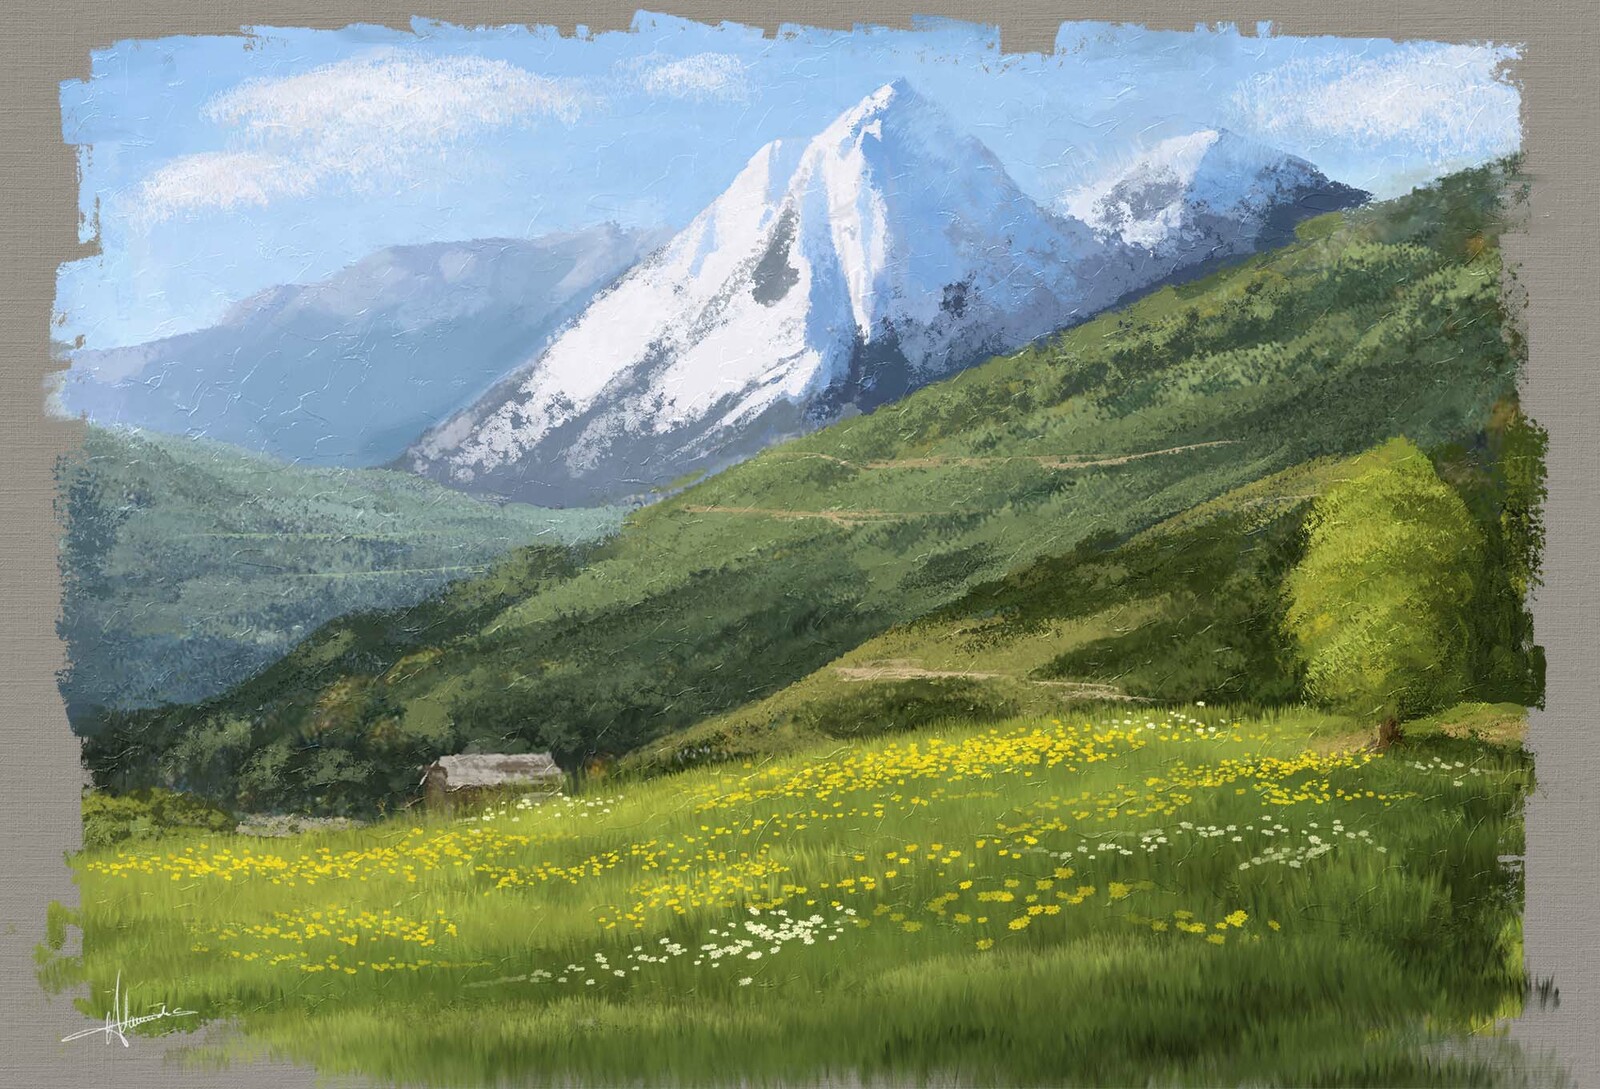 Digital Landscape Oil Painting of Mountains and Valleys *Updated*